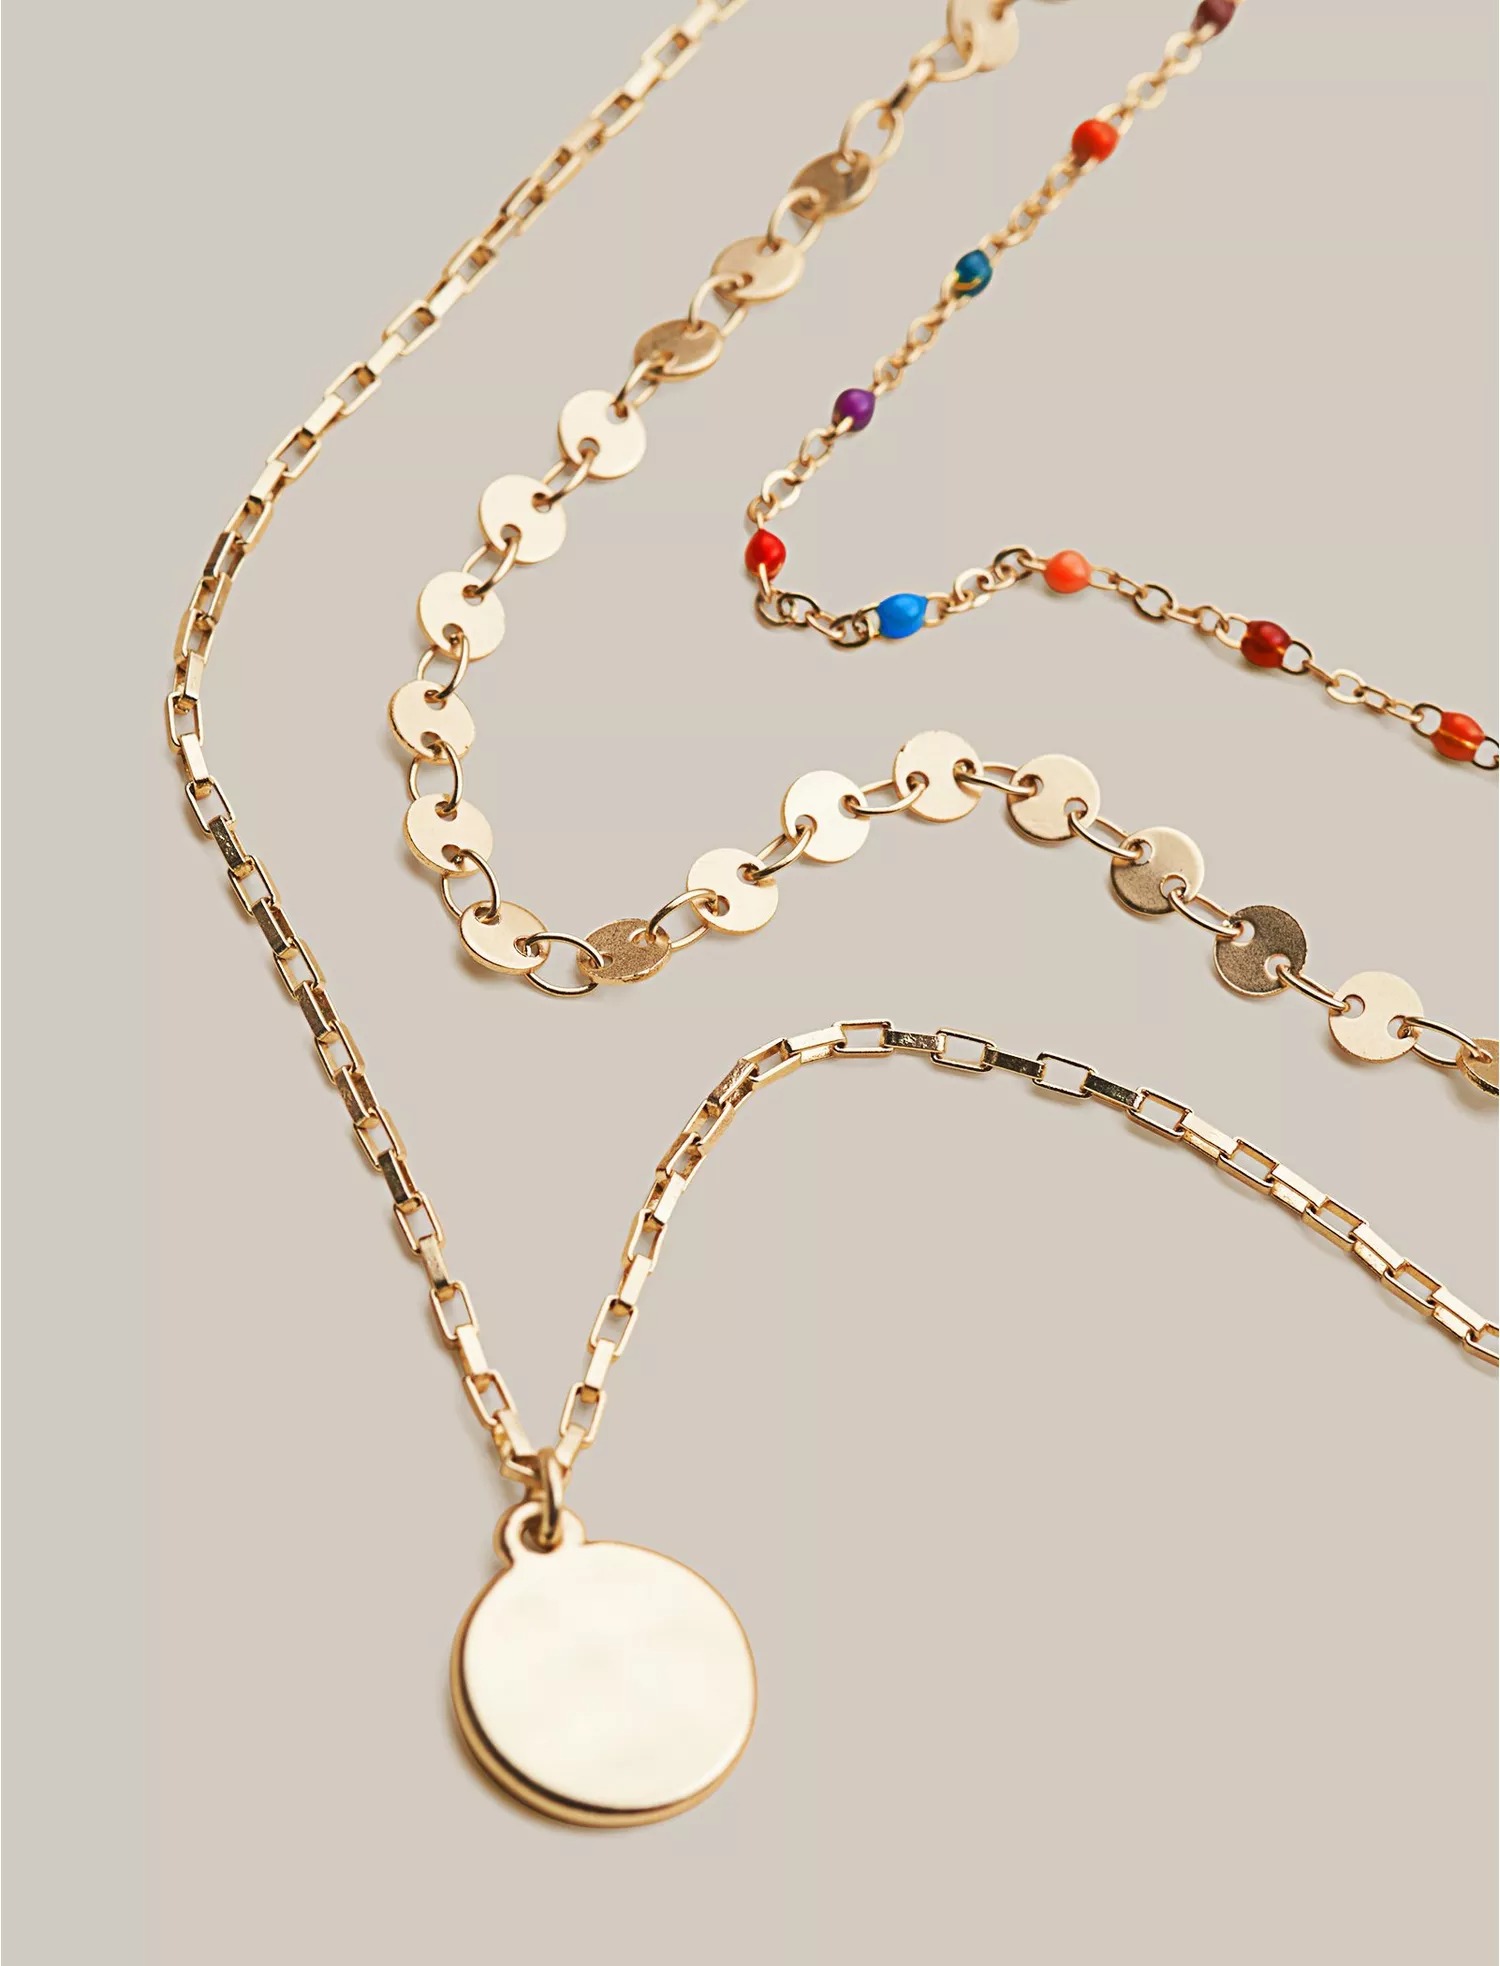 Lucky Brand: Confetti Layer Charm Necklace $10 & MORE + Free S/H